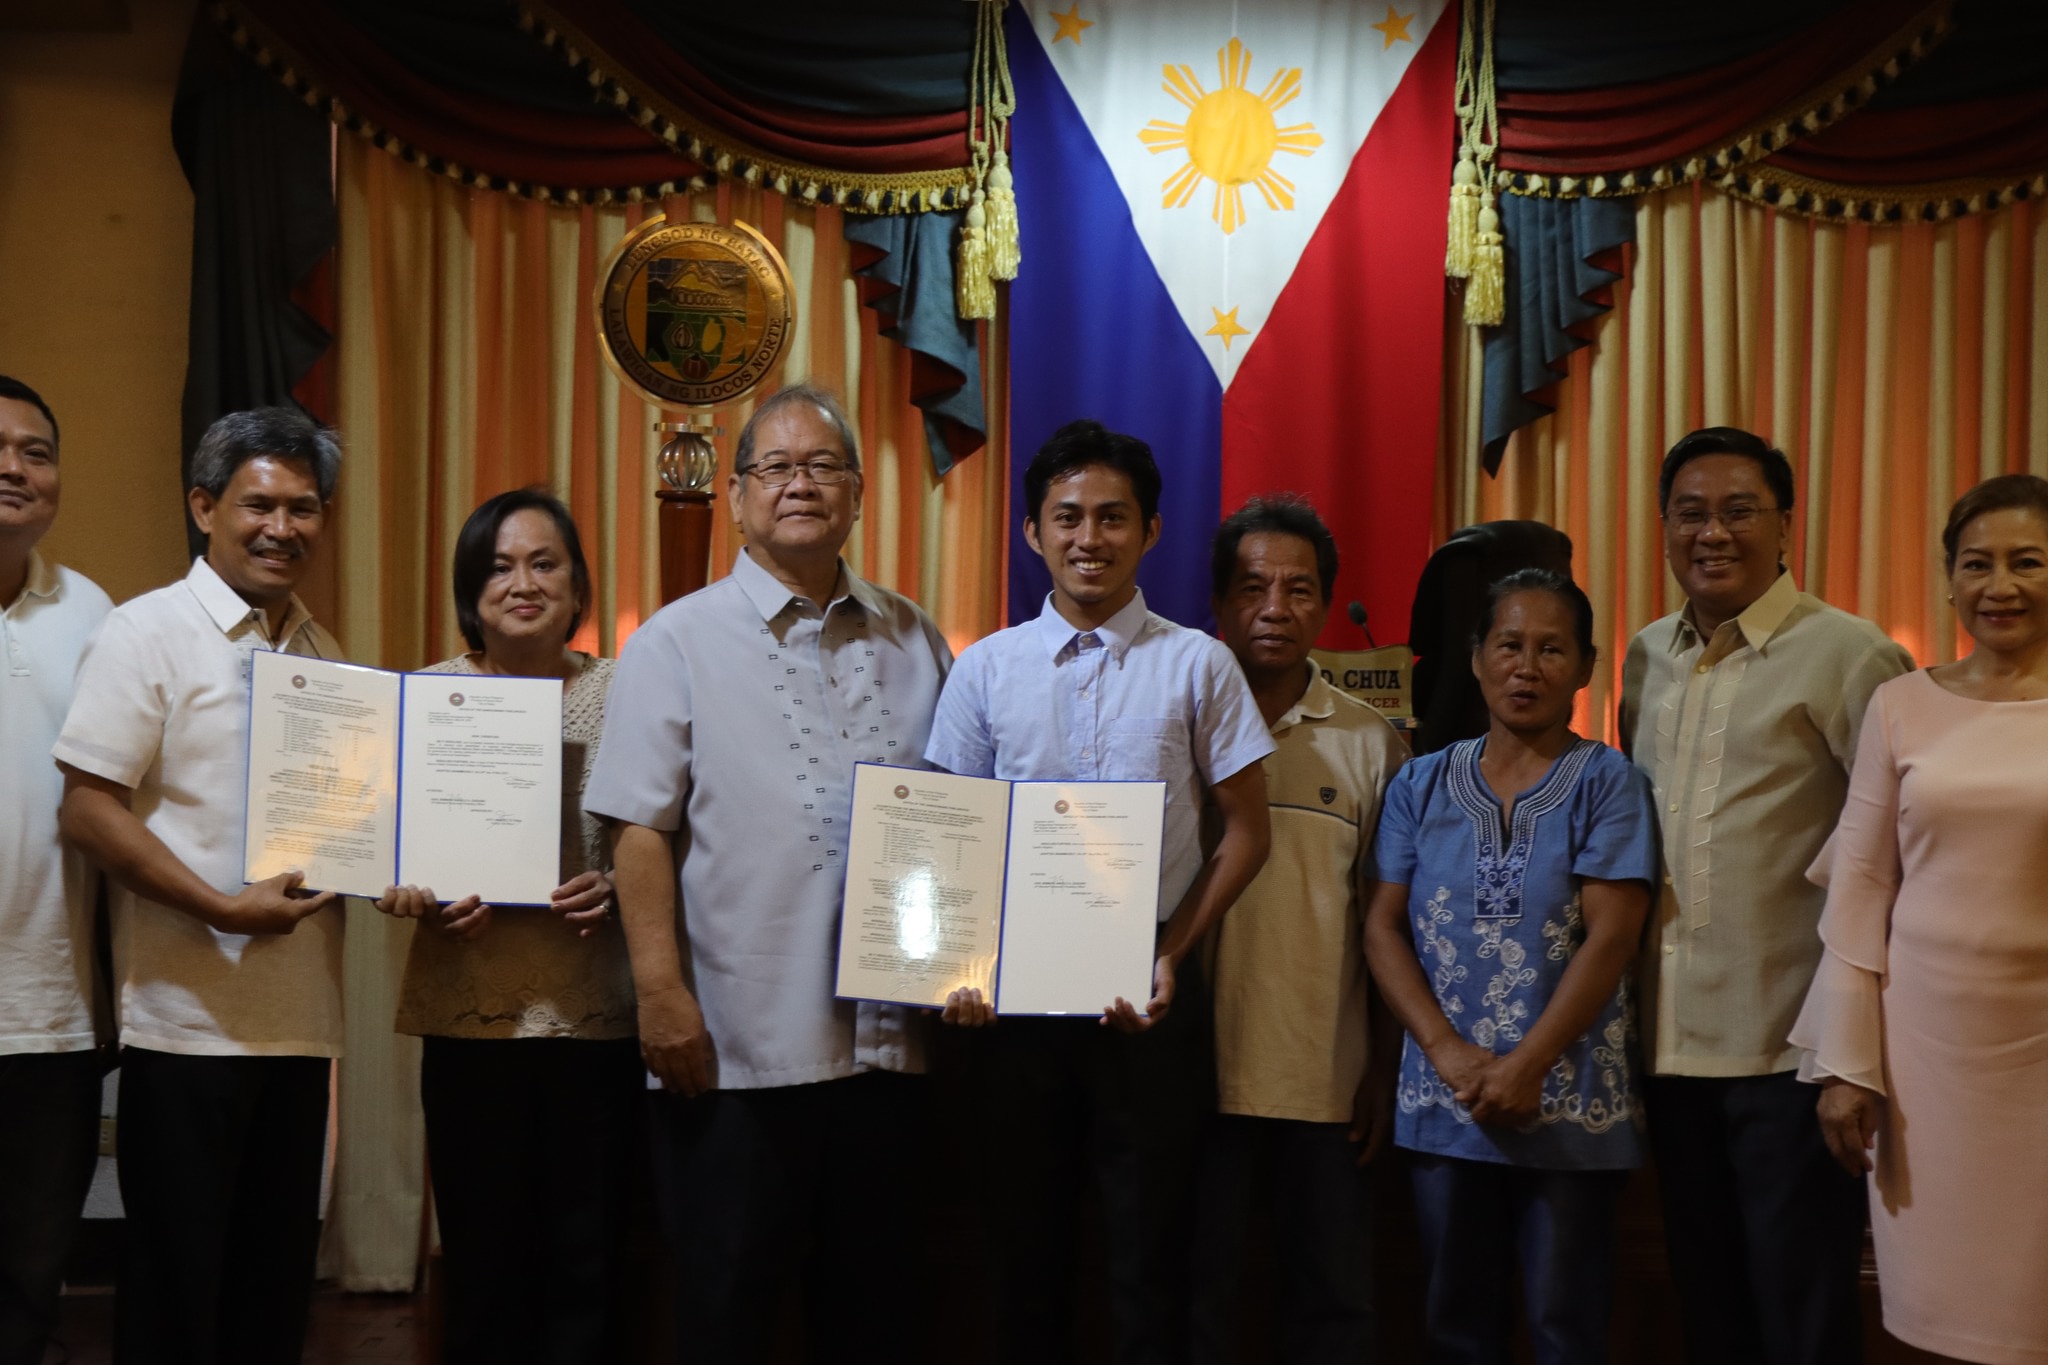 CGB PRESENTS RESOLUTIONS OF COMMENDATION TO EXCEPTIONAL MMSU BAR AND CIVIL ENGINEER LICENSURE EXAM PASSERS